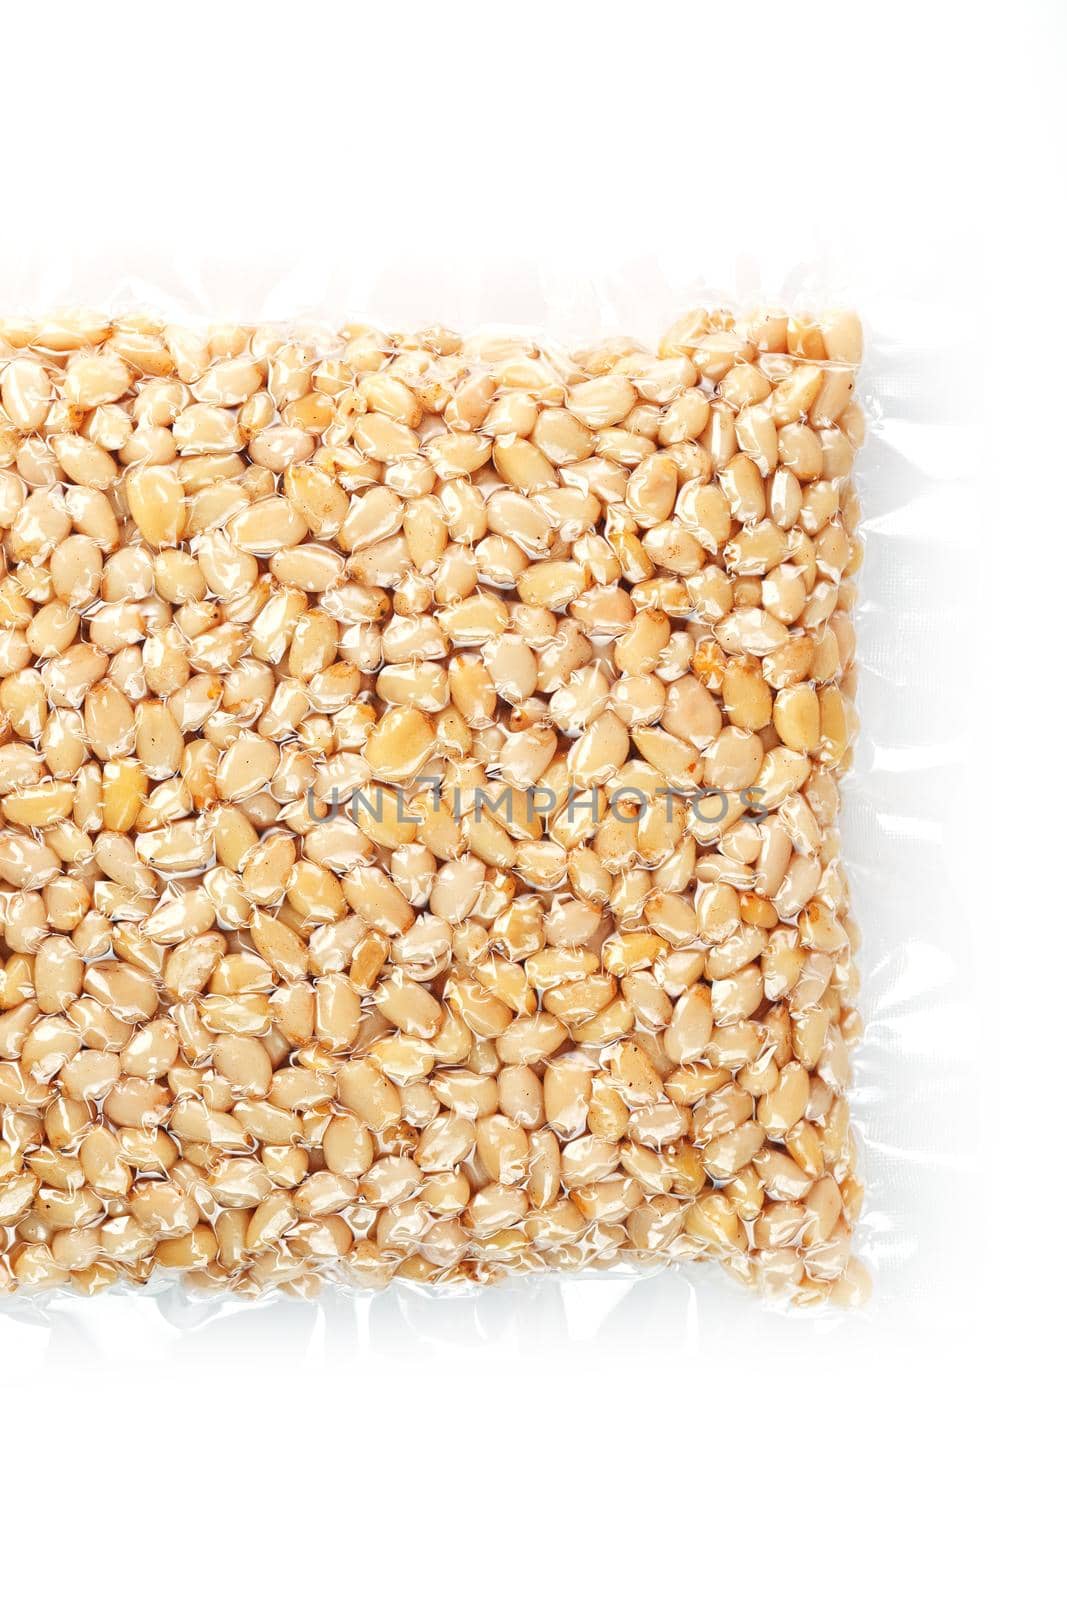 Kernels of peeled pine nuts in vacuum packaging on a white background by AlexGrec